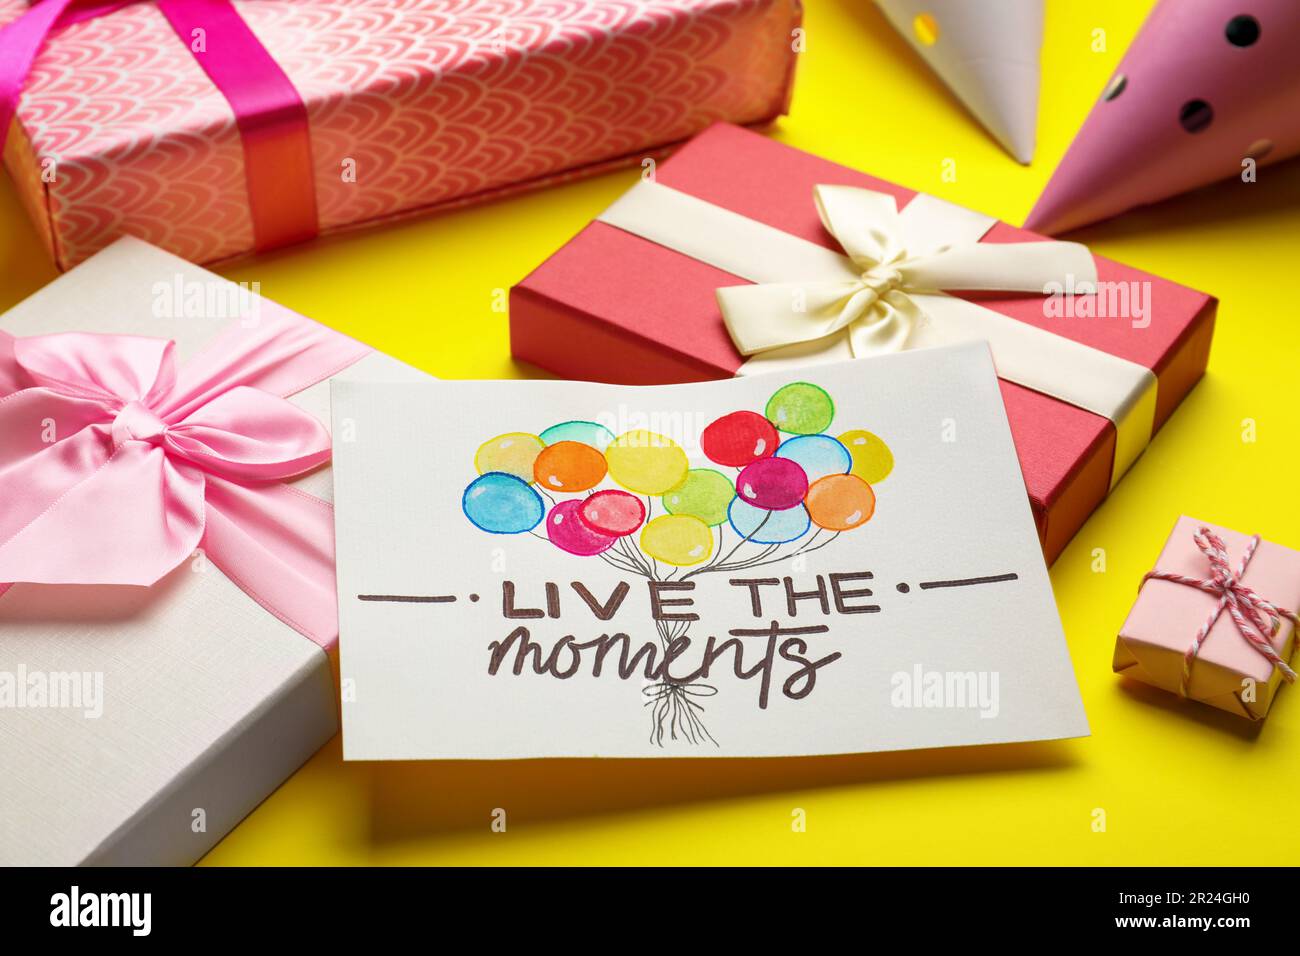 Card with life-affirming phrase Live The Moments and gift boxes on yellow background Stock Photo